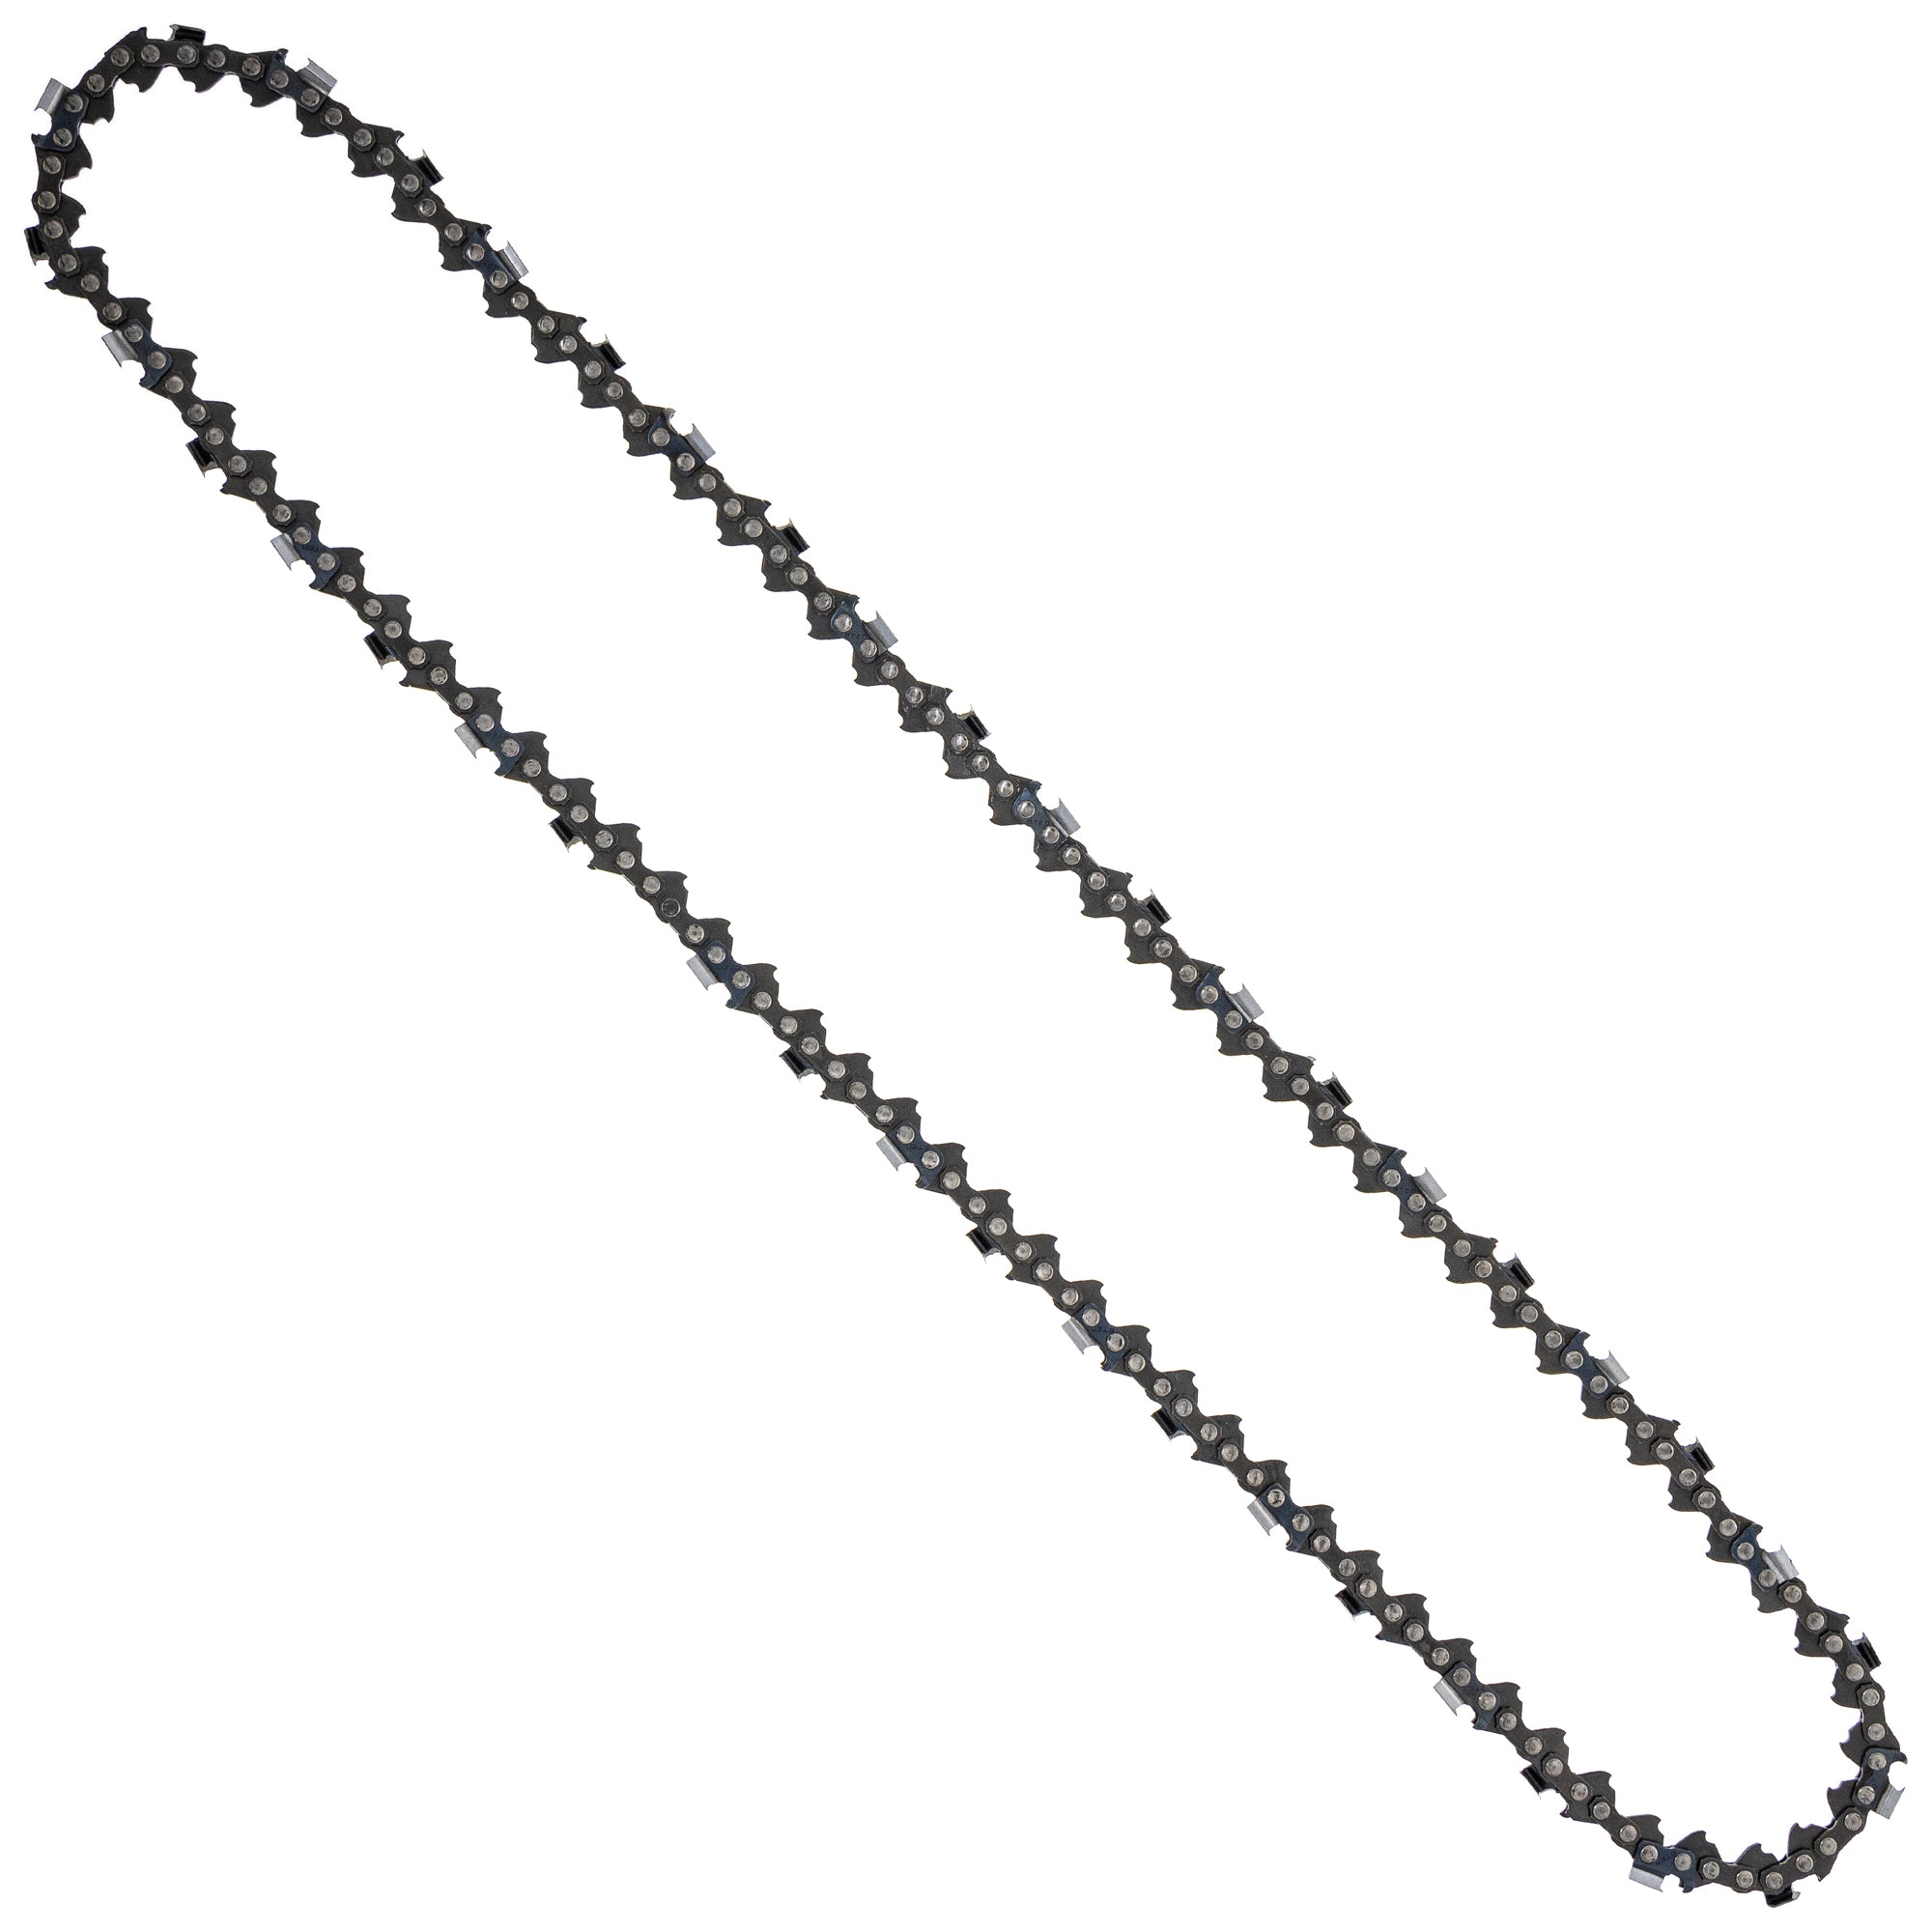 8TEN 810-CCC2279H Chain 4-Pack for zOTHER Stens Oregon MS 634 40 36